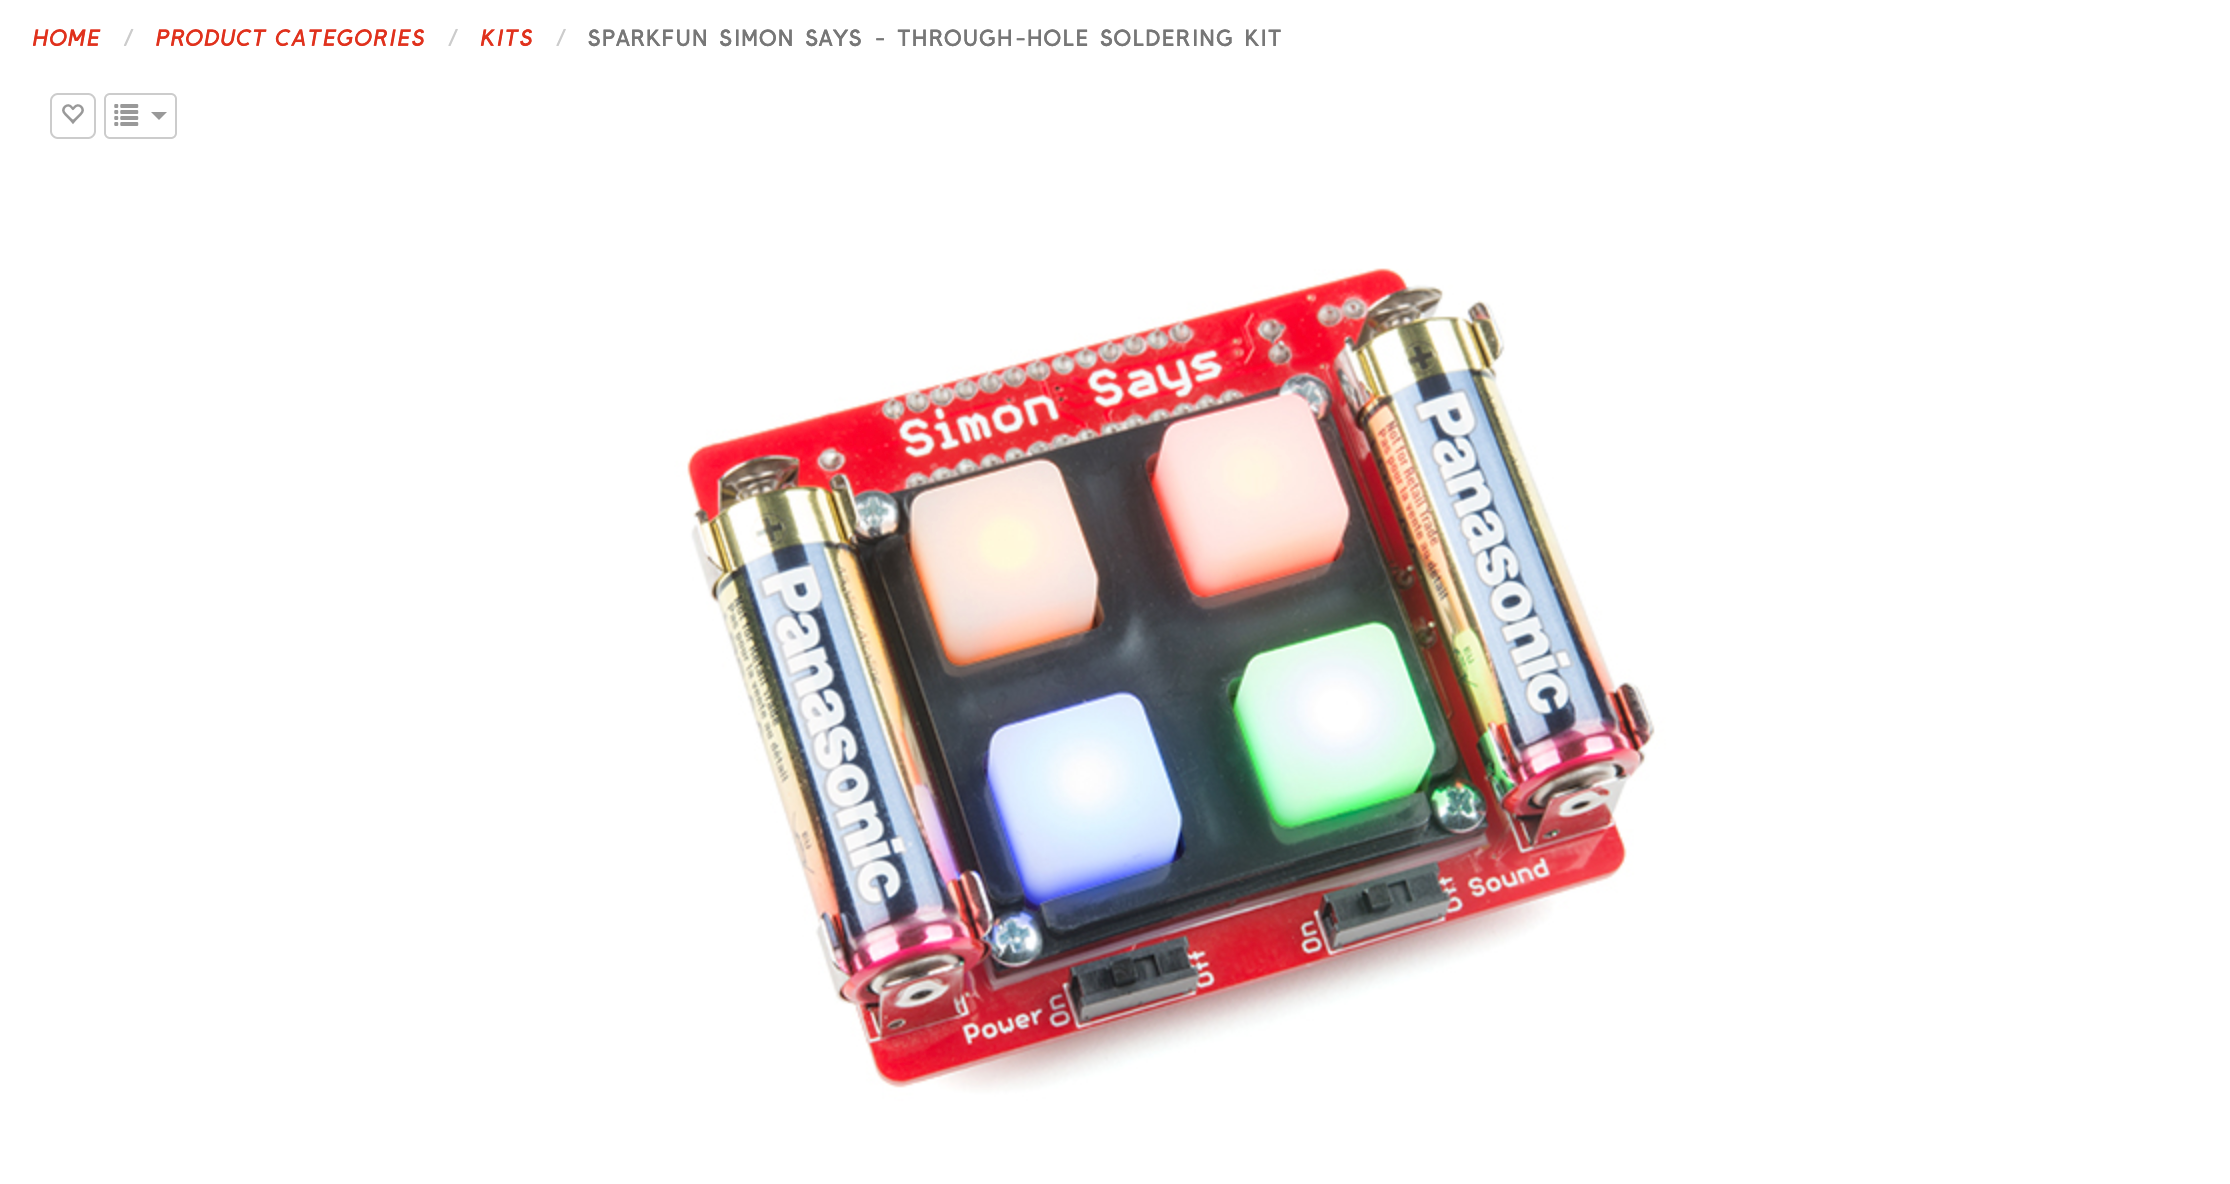 A screenshot of the SparkFun Simon Say's electronic project fully assembled